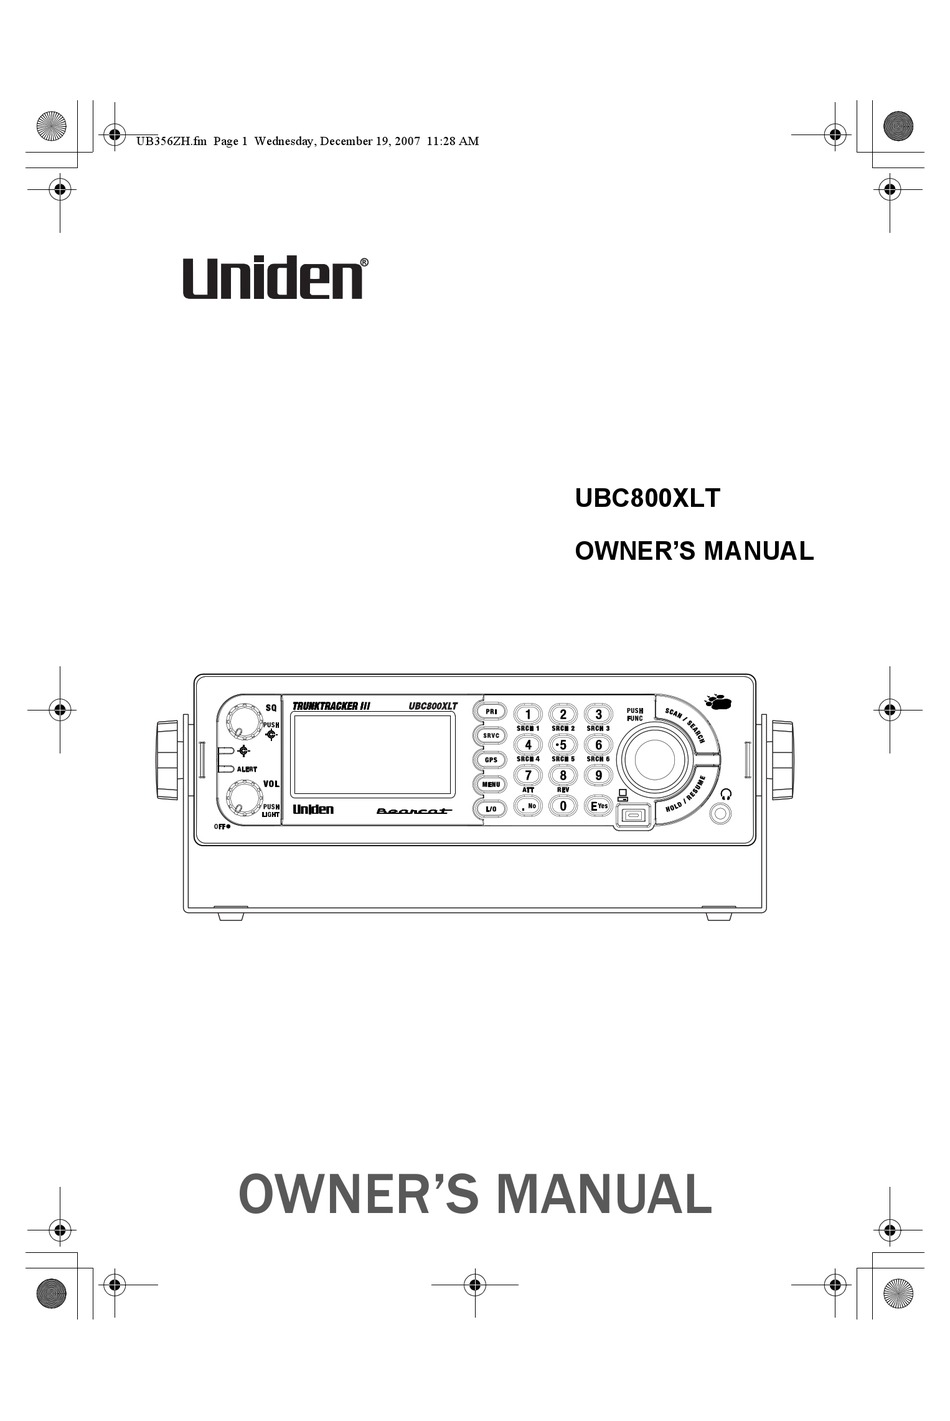 UB359 Handheld Scanning Receiver User Manual Main Page - Uniden Scanners  Guide Uniden America